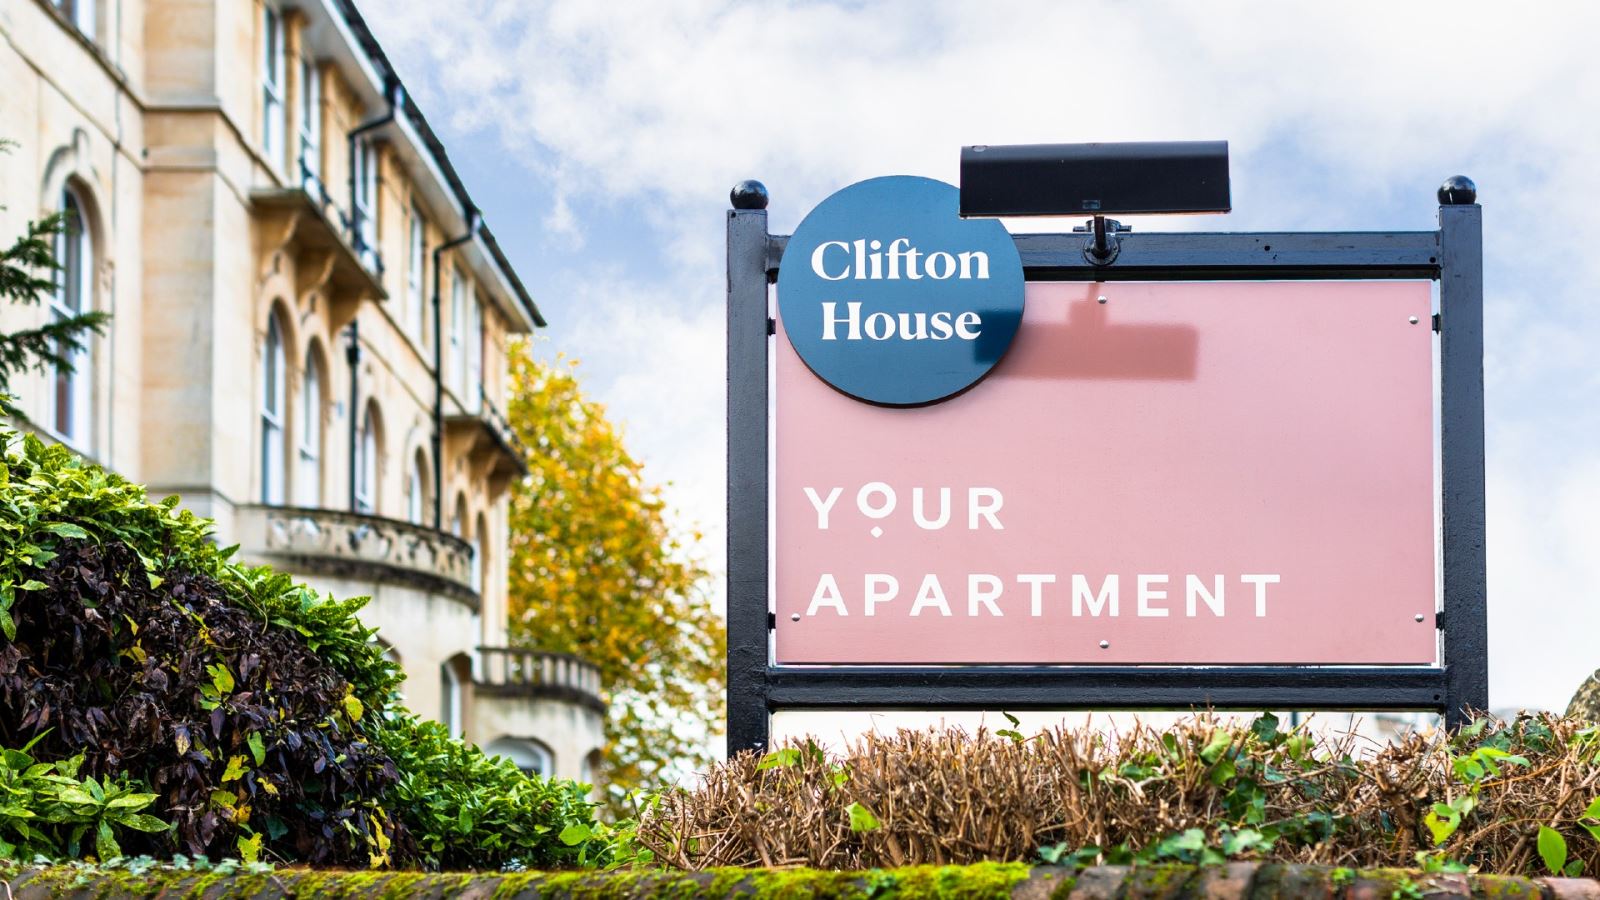 Sign for Your Apartment, Clifton House